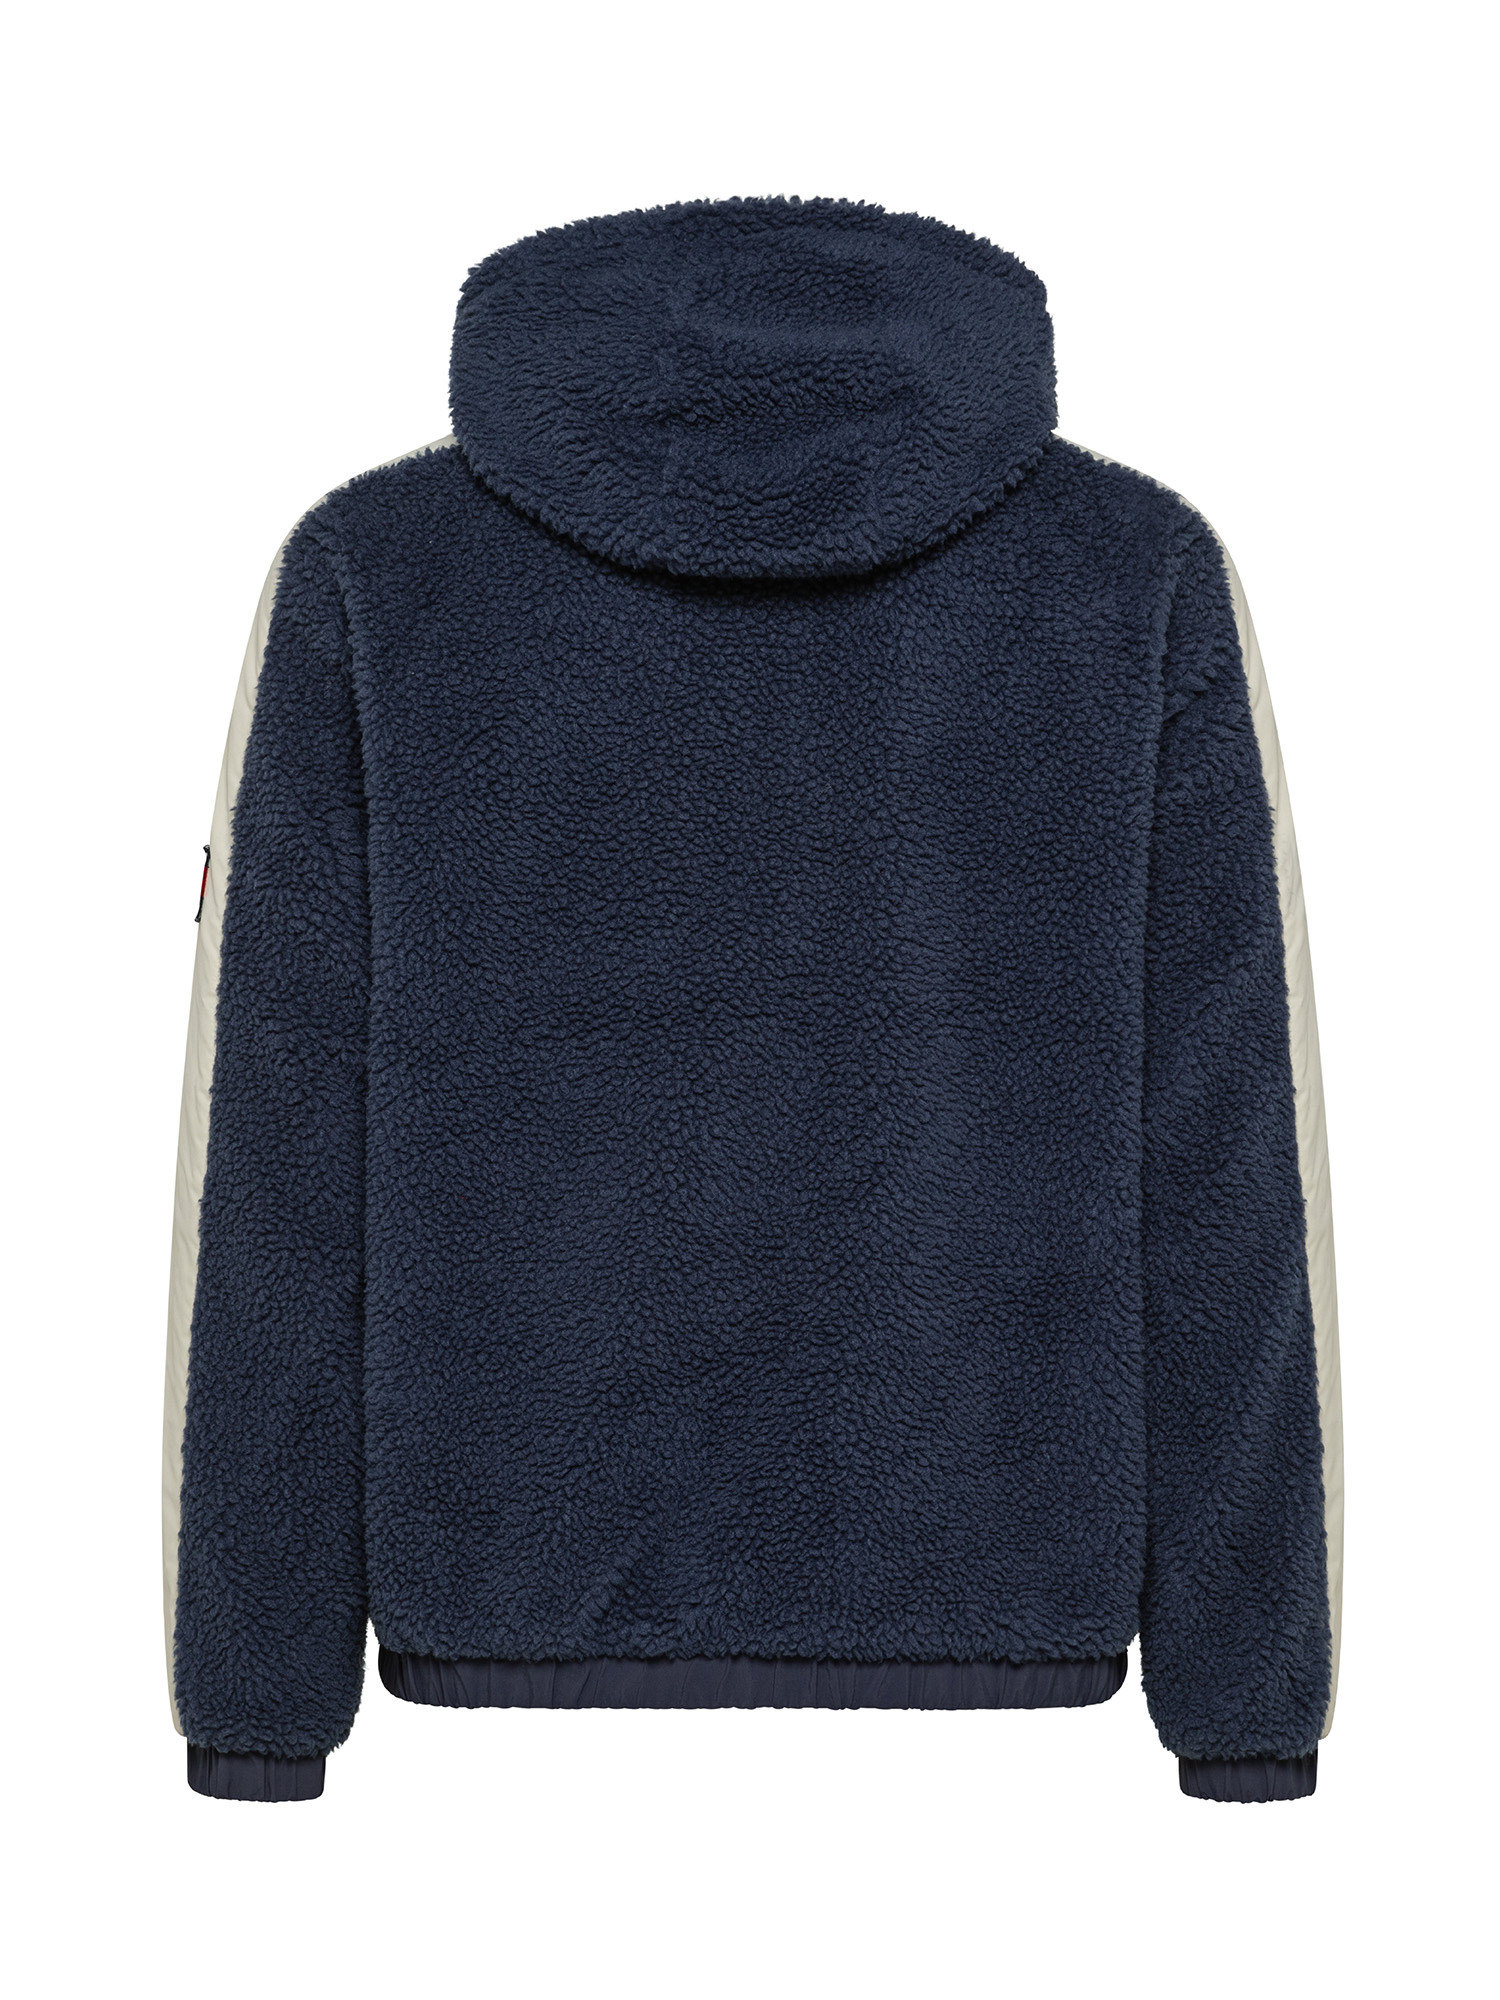 Giacca reversibile in sherpa, Blu, large image number 2